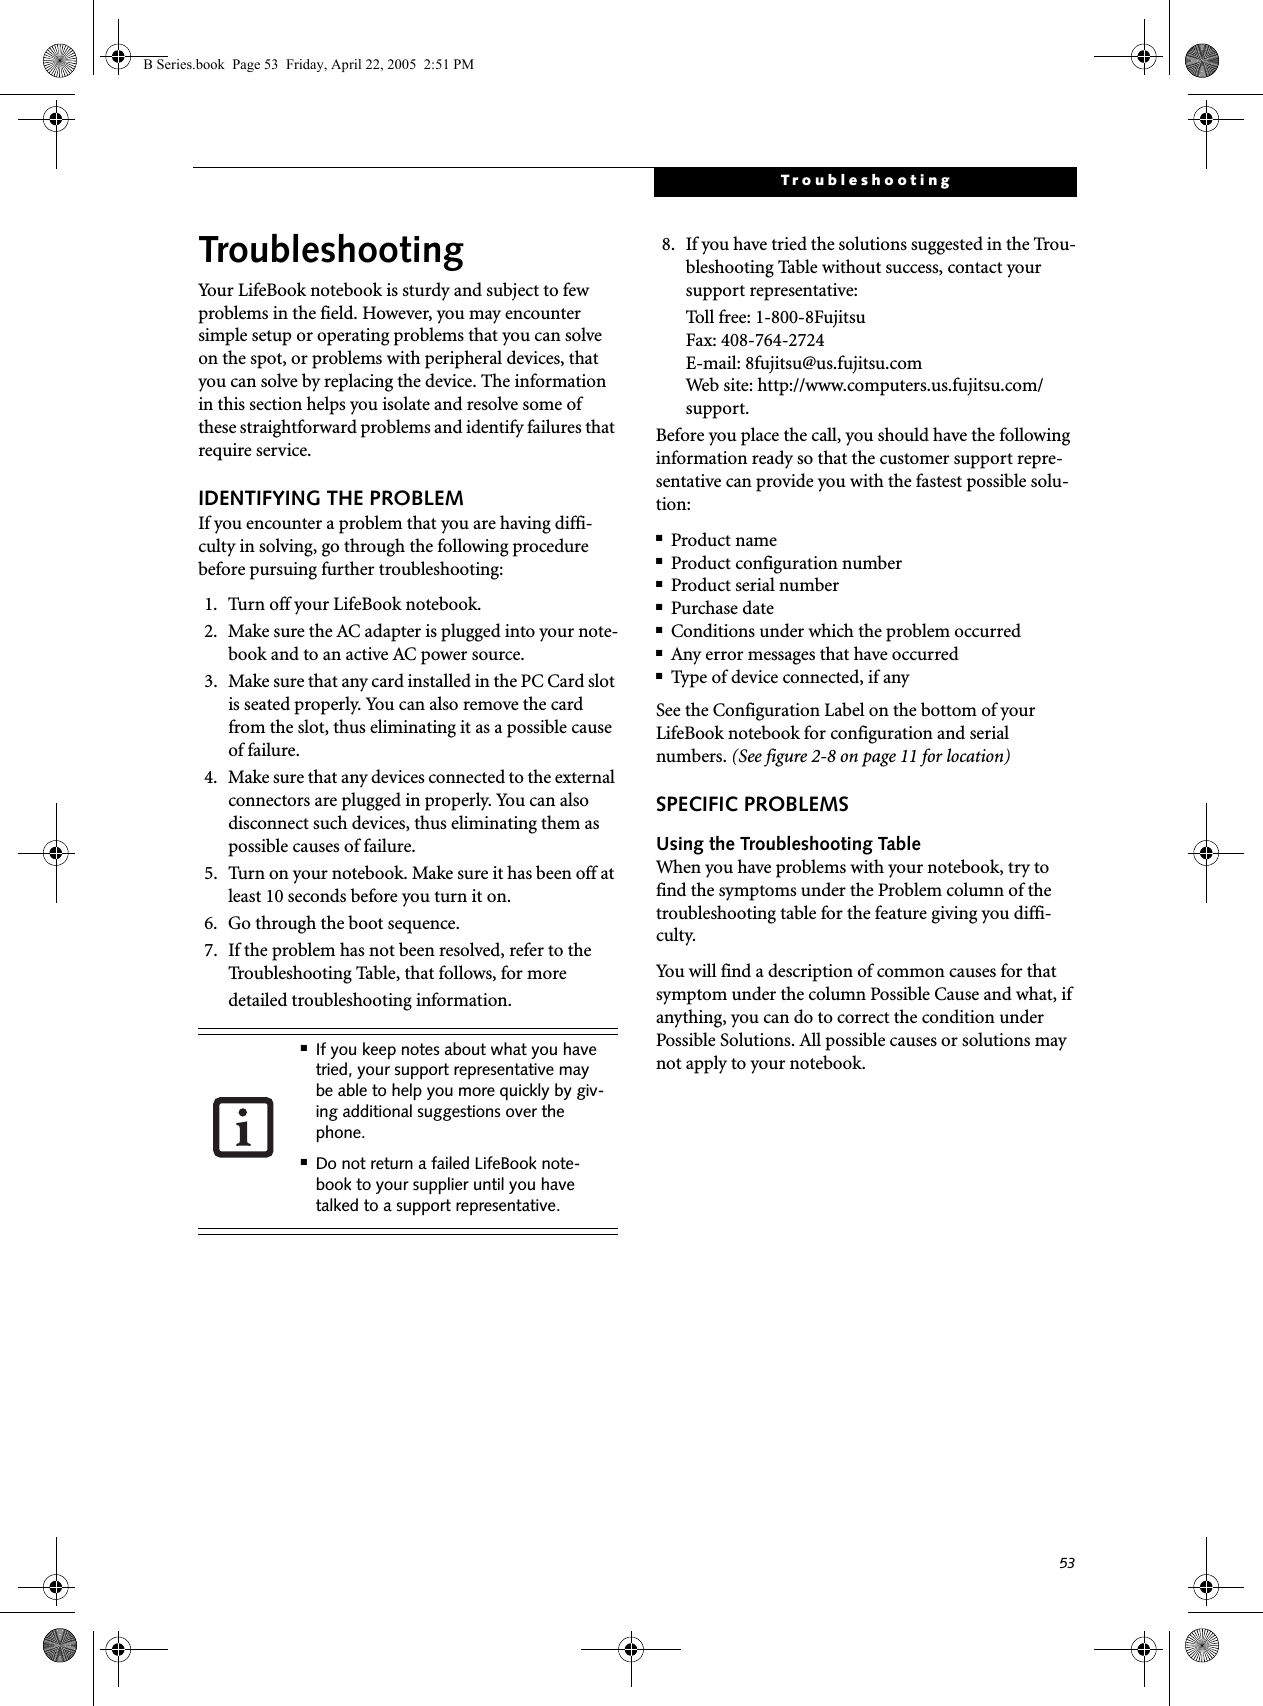 53TroubleshootingTroubleshootingYour LifeBook notebook is sturdy and subject to few problems in the field. However, you may encounter simple setup or operating problems that you can solve on the spot, or problems with peripheral devices, that you can solve by replacing the device. The information in this section helps you isolate and resolve some of these straightforward problems and identify failures that require service.IDENTIFYING THE PROBLEMIf you encounter a problem that you are having diffi-culty in solving, go through the following procedure before pursuing further troubleshooting:1. Turn off your LifeBook notebook.2. Make sure the AC adapter is plugged into your note-book and to an active AC power source.3. Make sure that any card installed in the PC Card slot is seated properly. You can also remove the card from the slot, thus eliminating it as a possible cause of failure.4. Make sure that any devices connected to the external connectors are plugged in properly. You can also disconnect such devices, thus eliminating them as possible causes of failure.5. Turn on your notebook. Make sure it has been off at least 10 seconds before you turn it on.6. Go through the boot sequence.7. If the problem has not been resolved, refer to the Troubleshooting Table, that follows, for more detailed troubleshooting information. 8. If you have tried the solutions suggested in the Trou-bleshooting Table without success, contact your support representative: Toll free: 1-800-8Fujitsu Fax: 408-764-2724 E-mail: 8fujitsu@us.fujitsu.comWeb site: http://www.computers.us.fujitsu.com/support.Before you place the call, you should have the following information ready so that the customer support repre-sentative can provide you with the fastest possible solu-tion:■Product name■Product configuration number■Product serial number■Purchase date■Conditions under which the problem occurred■Any error messages that have occurred■Type of device connected, if anySee the Configuration Label on the bottom of yourLifeBook notebook for configuration and serial numbers. (See figure 2-8 on page 11 for location)SPECIFIC PROBLEMSUsing the Troubleshooting TableWhen you have problems with your notebook, try to find the symptoms under the Problem column of the troubleshooting table for the feature giving you diffi-culty. You will find a description of common causes for that symptom under the column Possible Cause and what, if anything, you can do to correct the condition under Possible Solutions. All possible causes or solutions may not apply to your notebook.■If you keep notes about what you have tried, your support representative may be able to help you more quickly by giv-ing additional suggestions over the phone.■Do not return a failed LifeBook note-book to your supplier until you have talked to a support representative.B Series.book  Page 53  Friday, April 22, 2005  2:51 PM